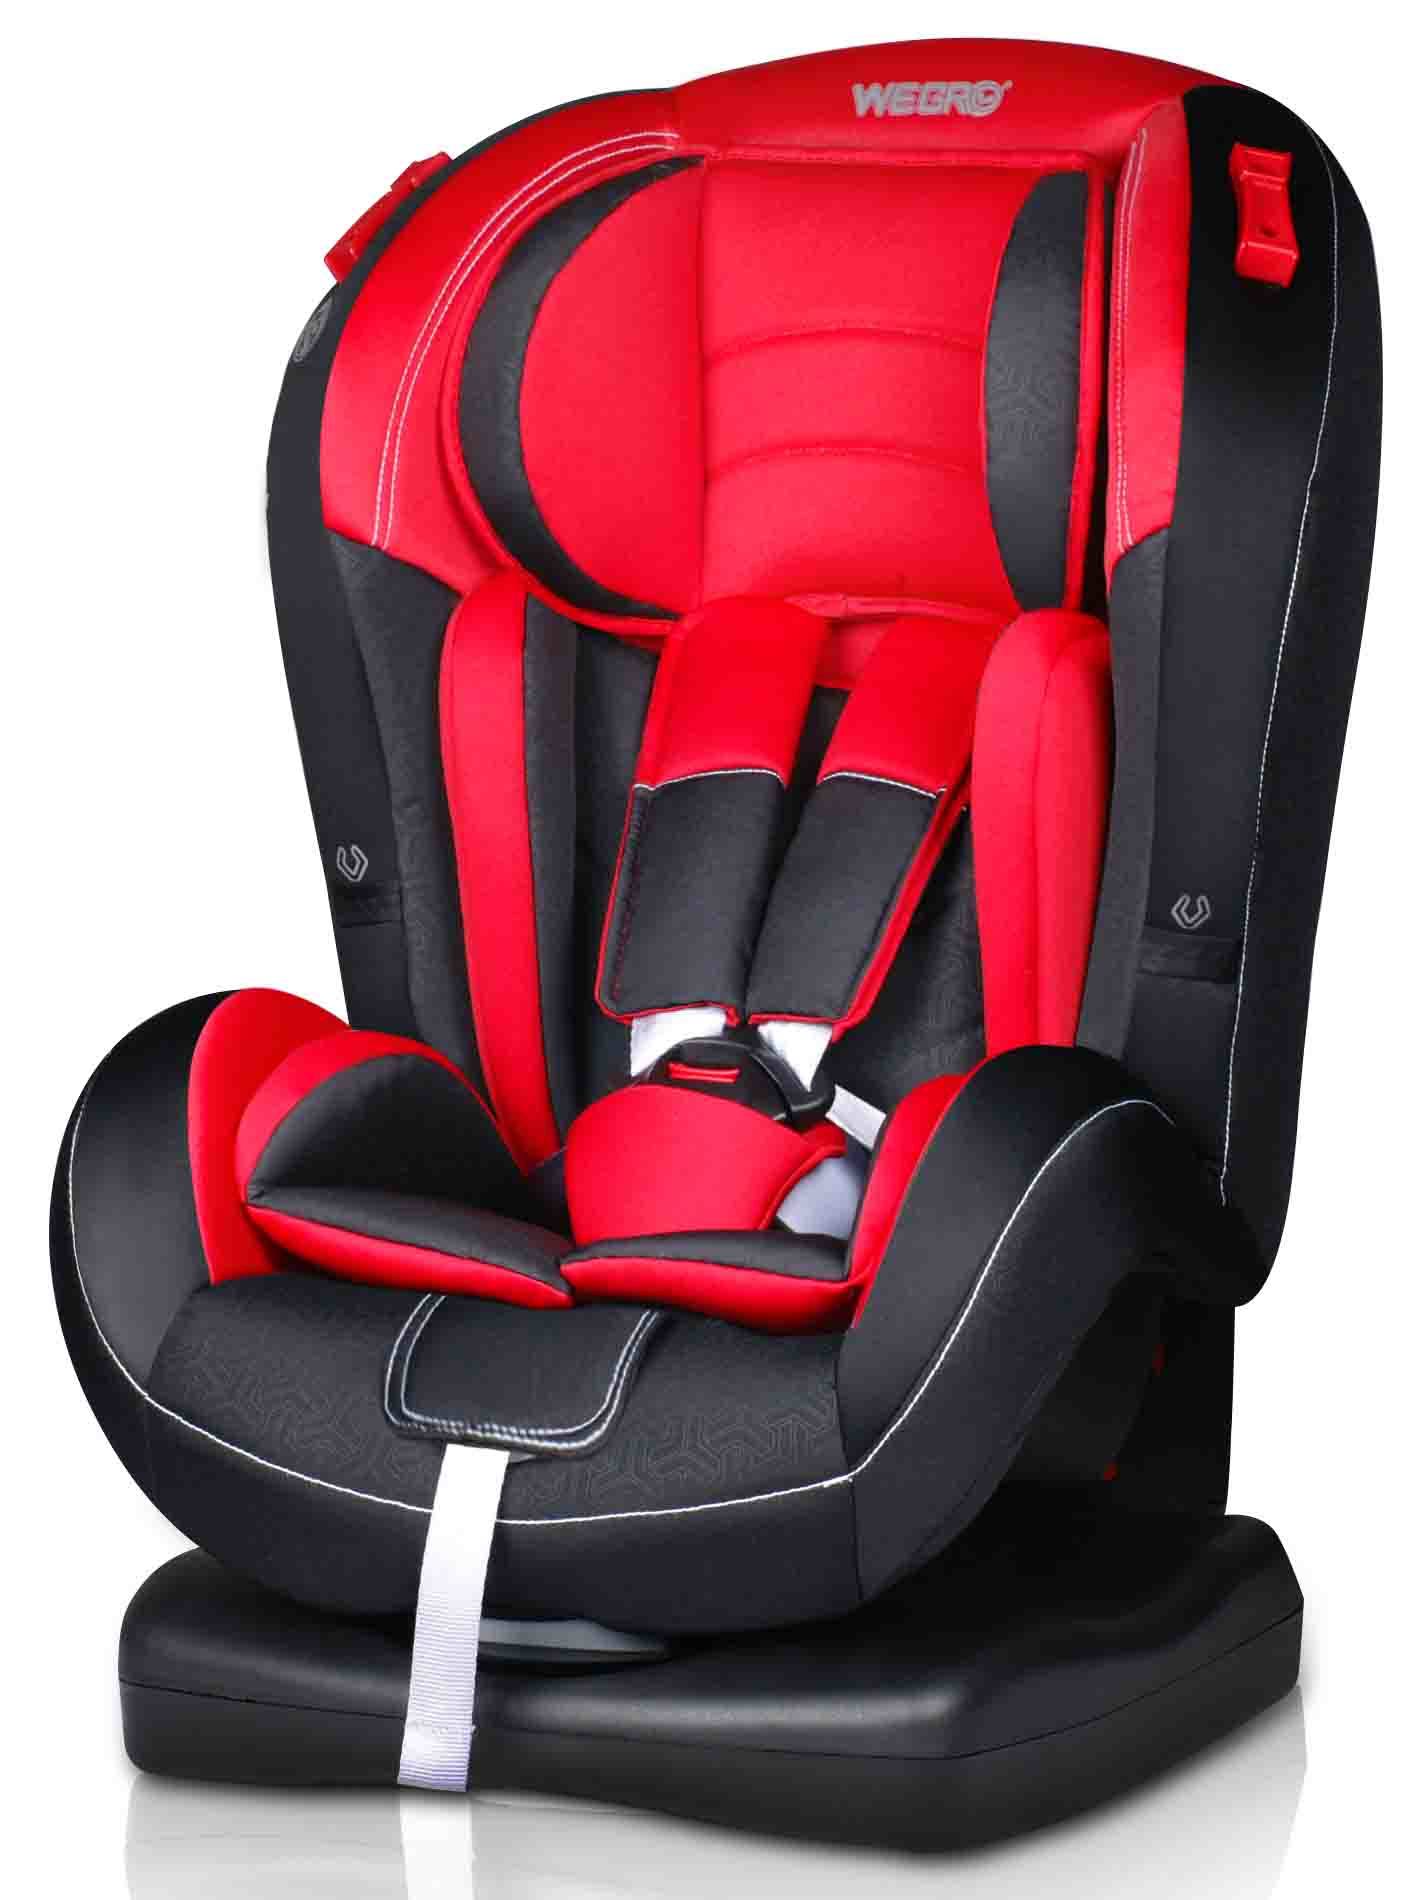 We02 Embrace Baby Car Seats/Car Seats/Safety Car Seats Group1+2 9-25kgs Red